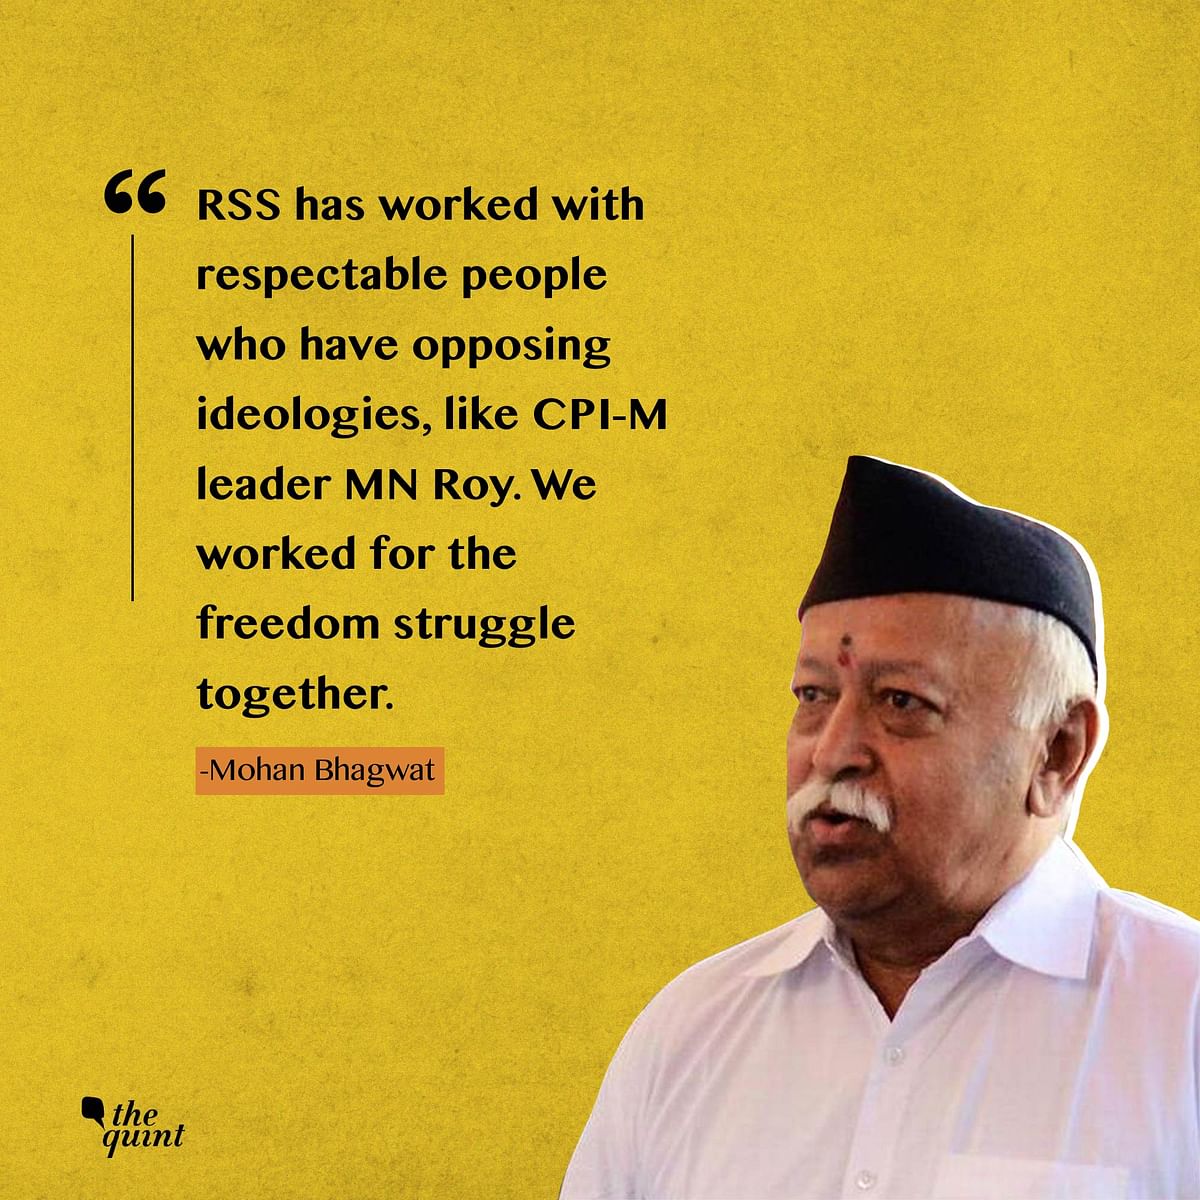 Two RSS chiefs, each with a different view of India.